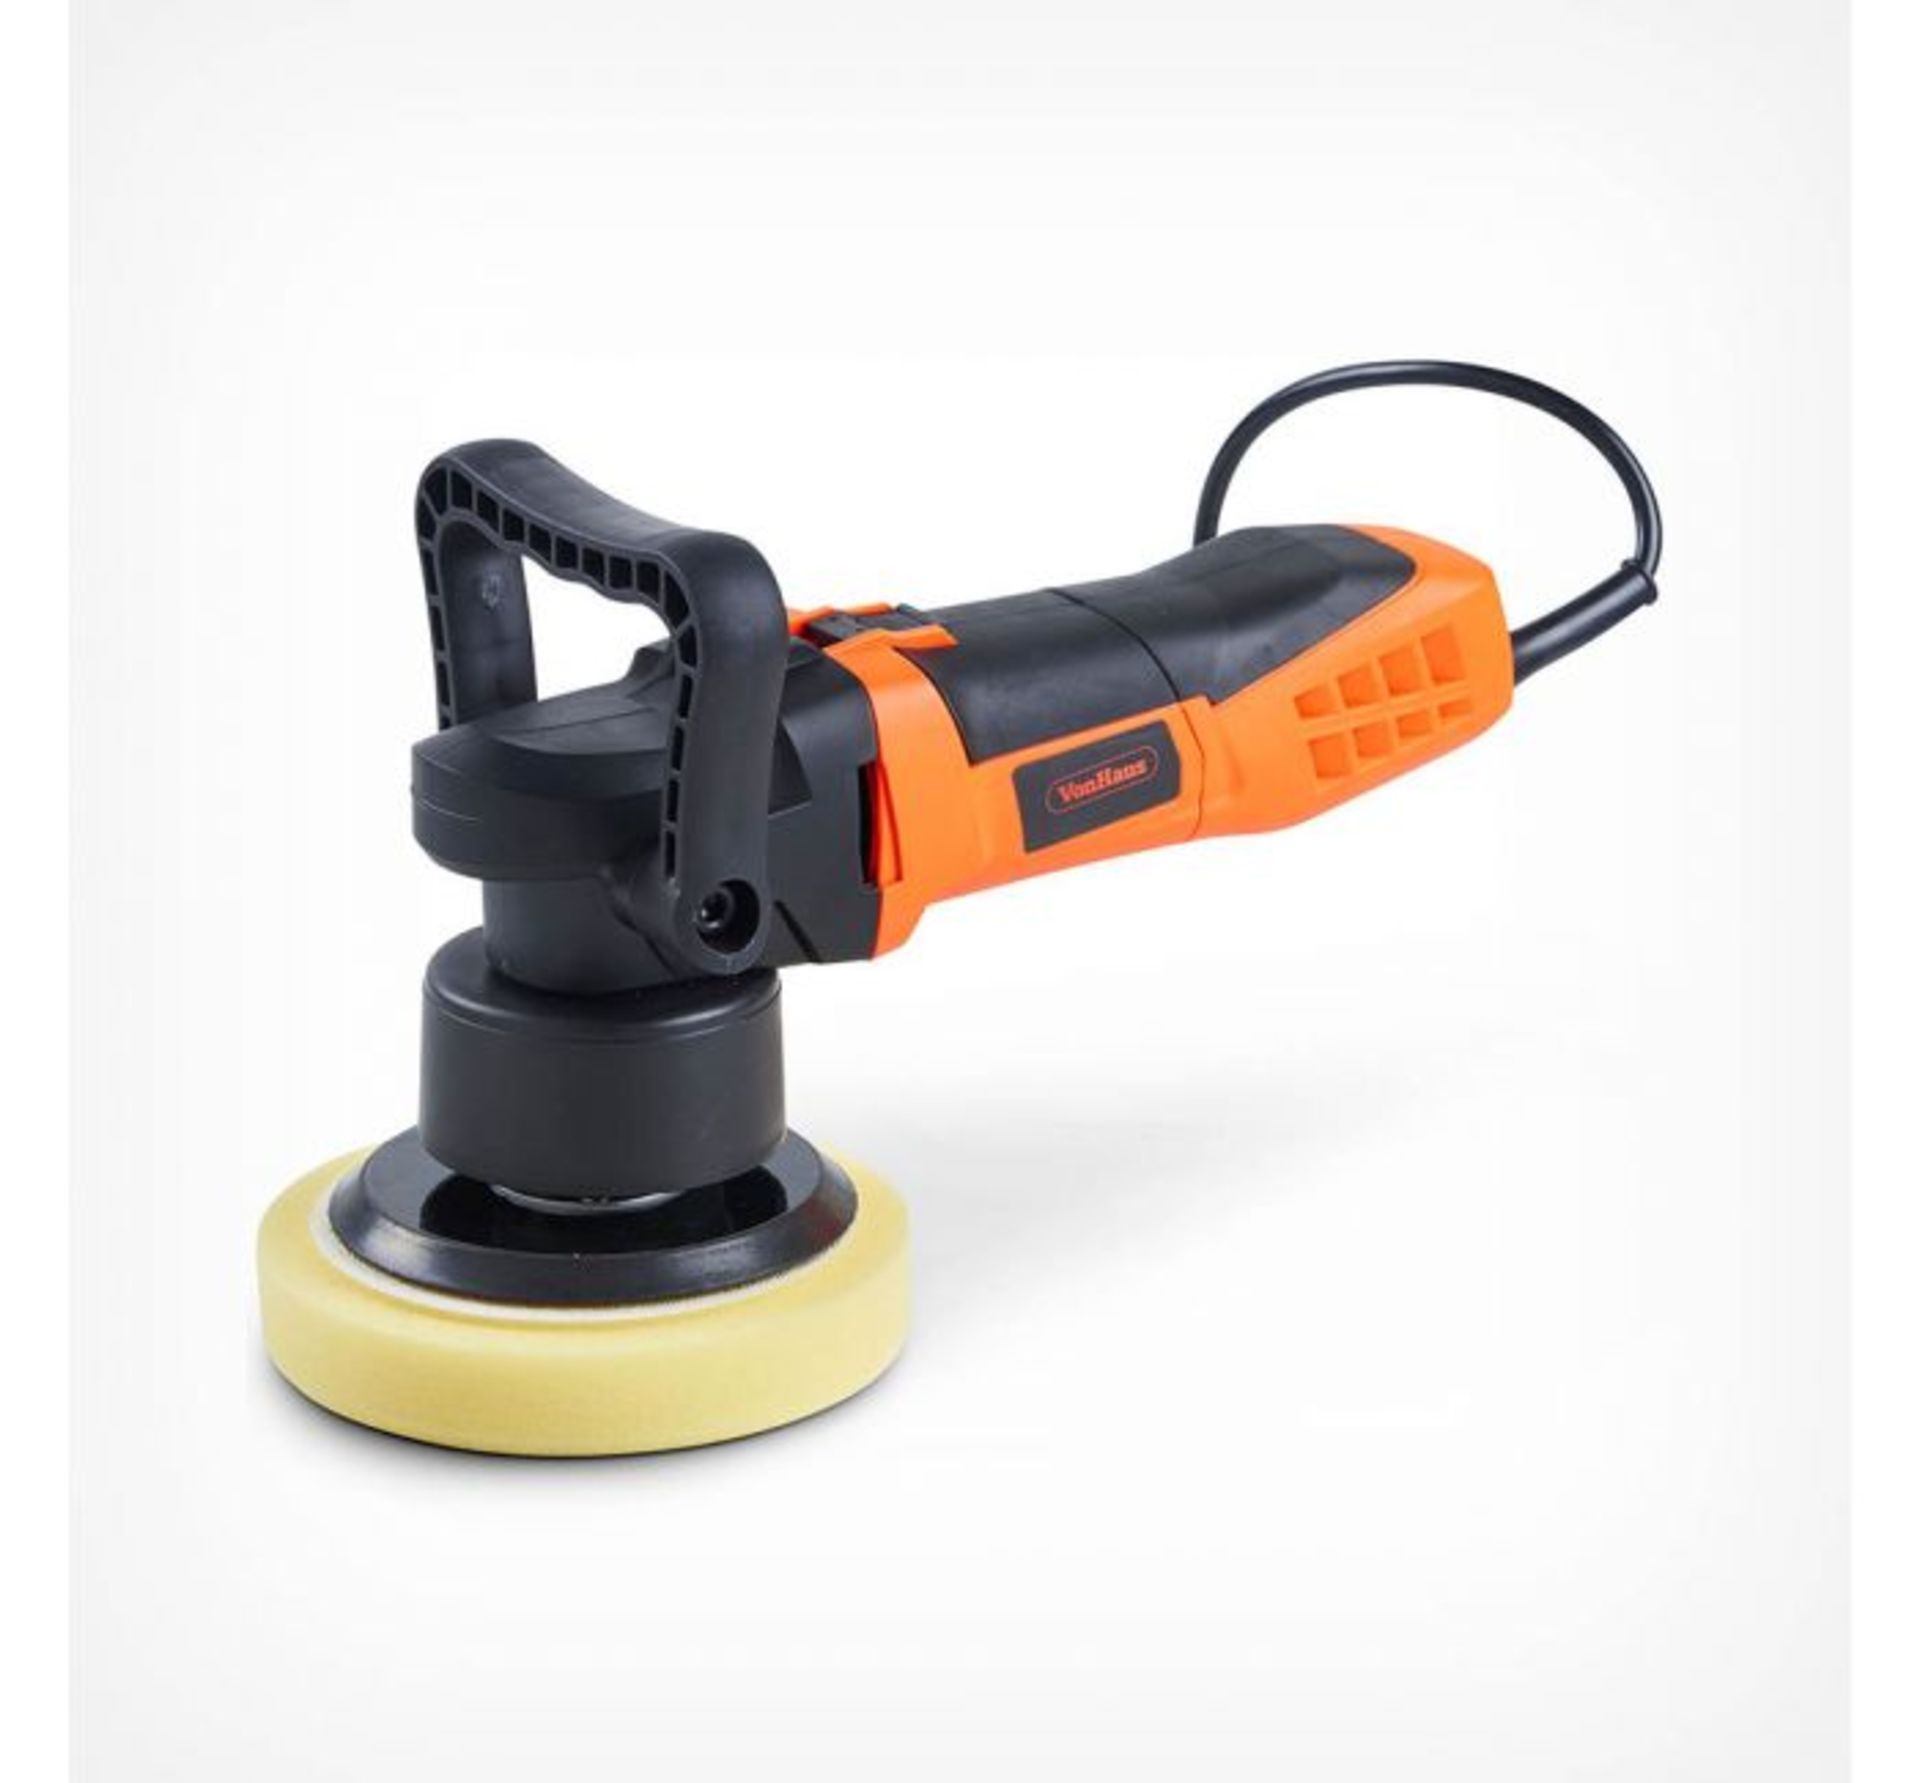 (F26) Random Orbital Polisher Kit 600W power, the polisher operates at six speed settings from ... - Image 2 of 3